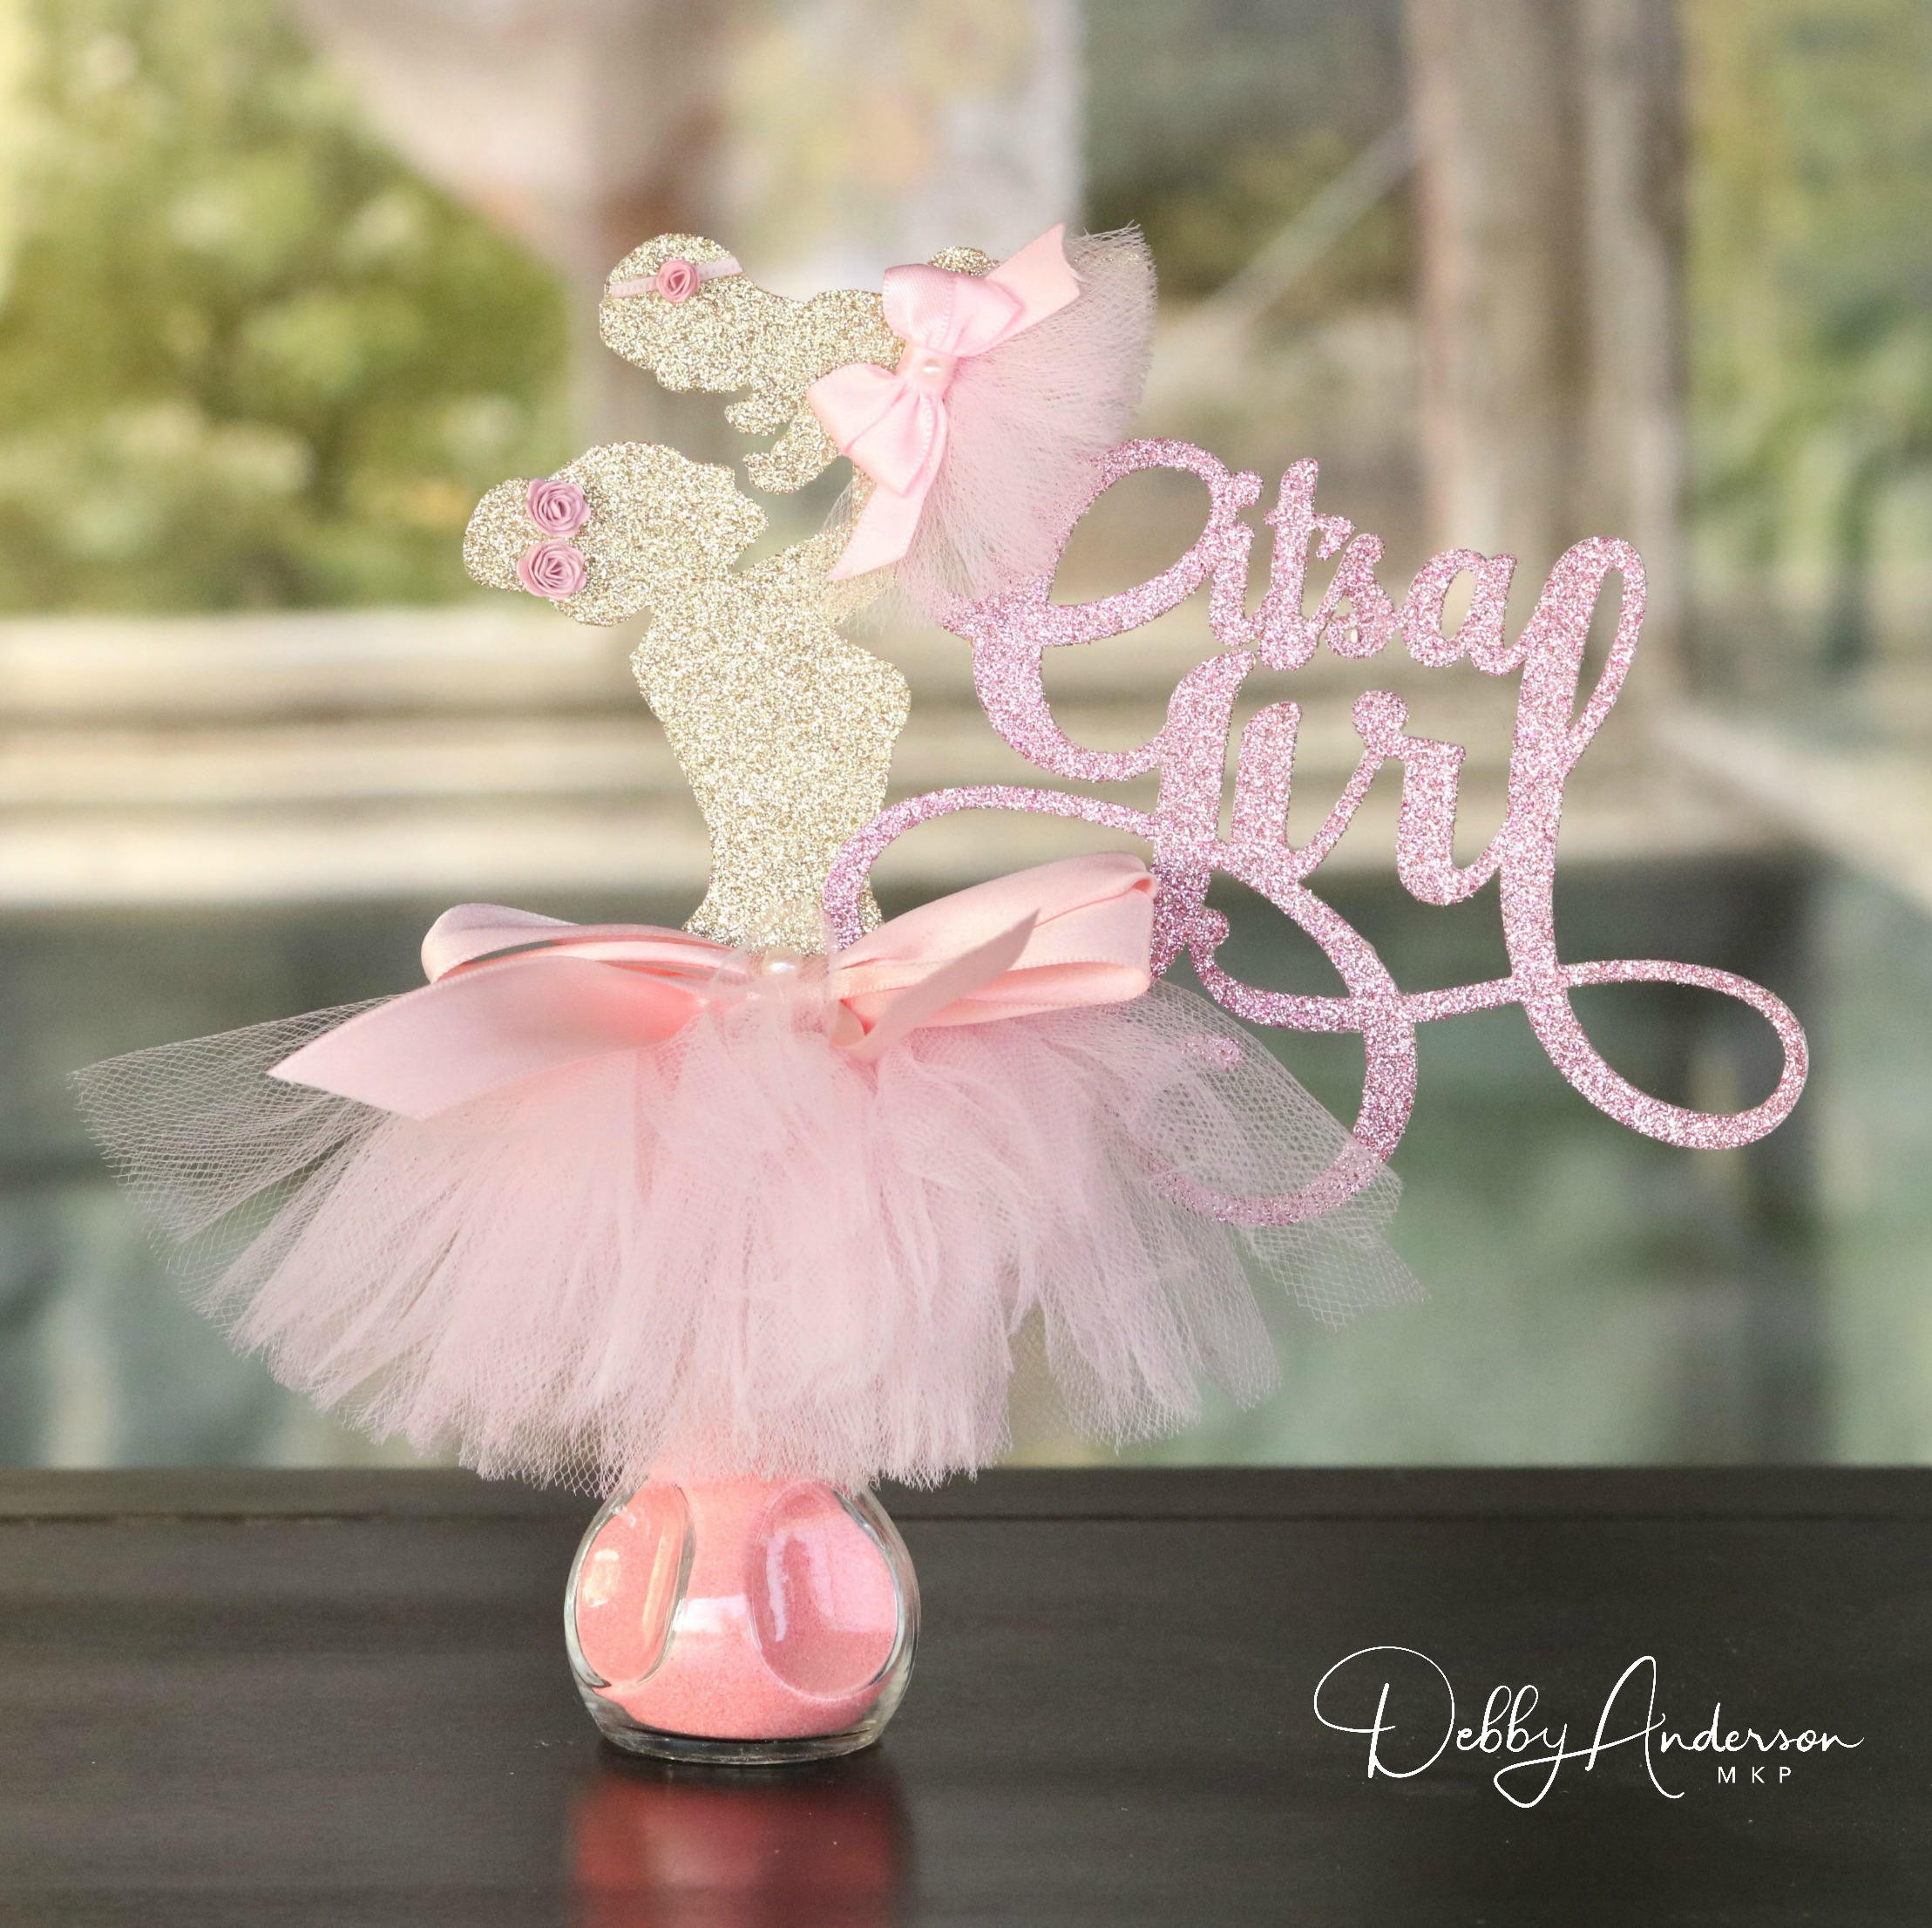 DIY Baby Shower Centerpieces For Girl
 It s A Girl Centerpiece Baby Shower Centerpiece Its A